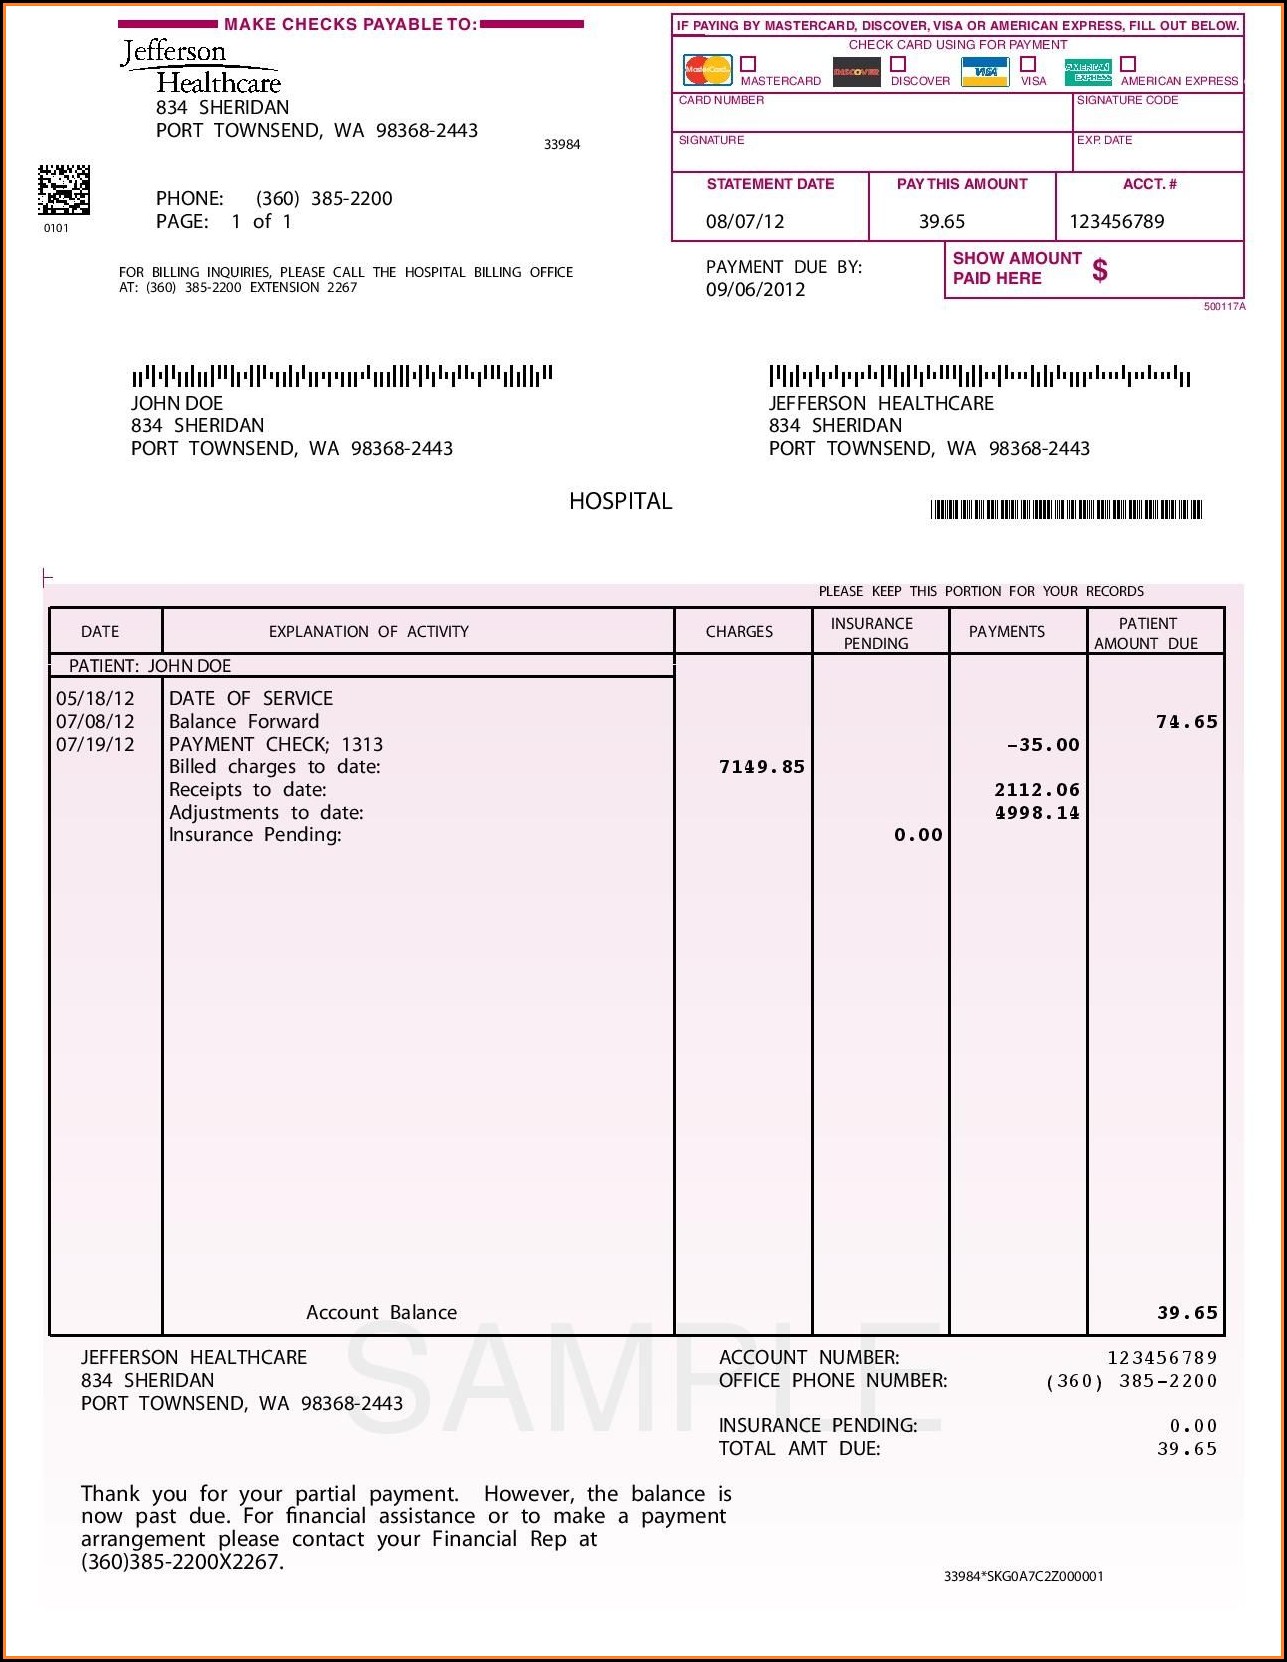 Invoice For Payment Template